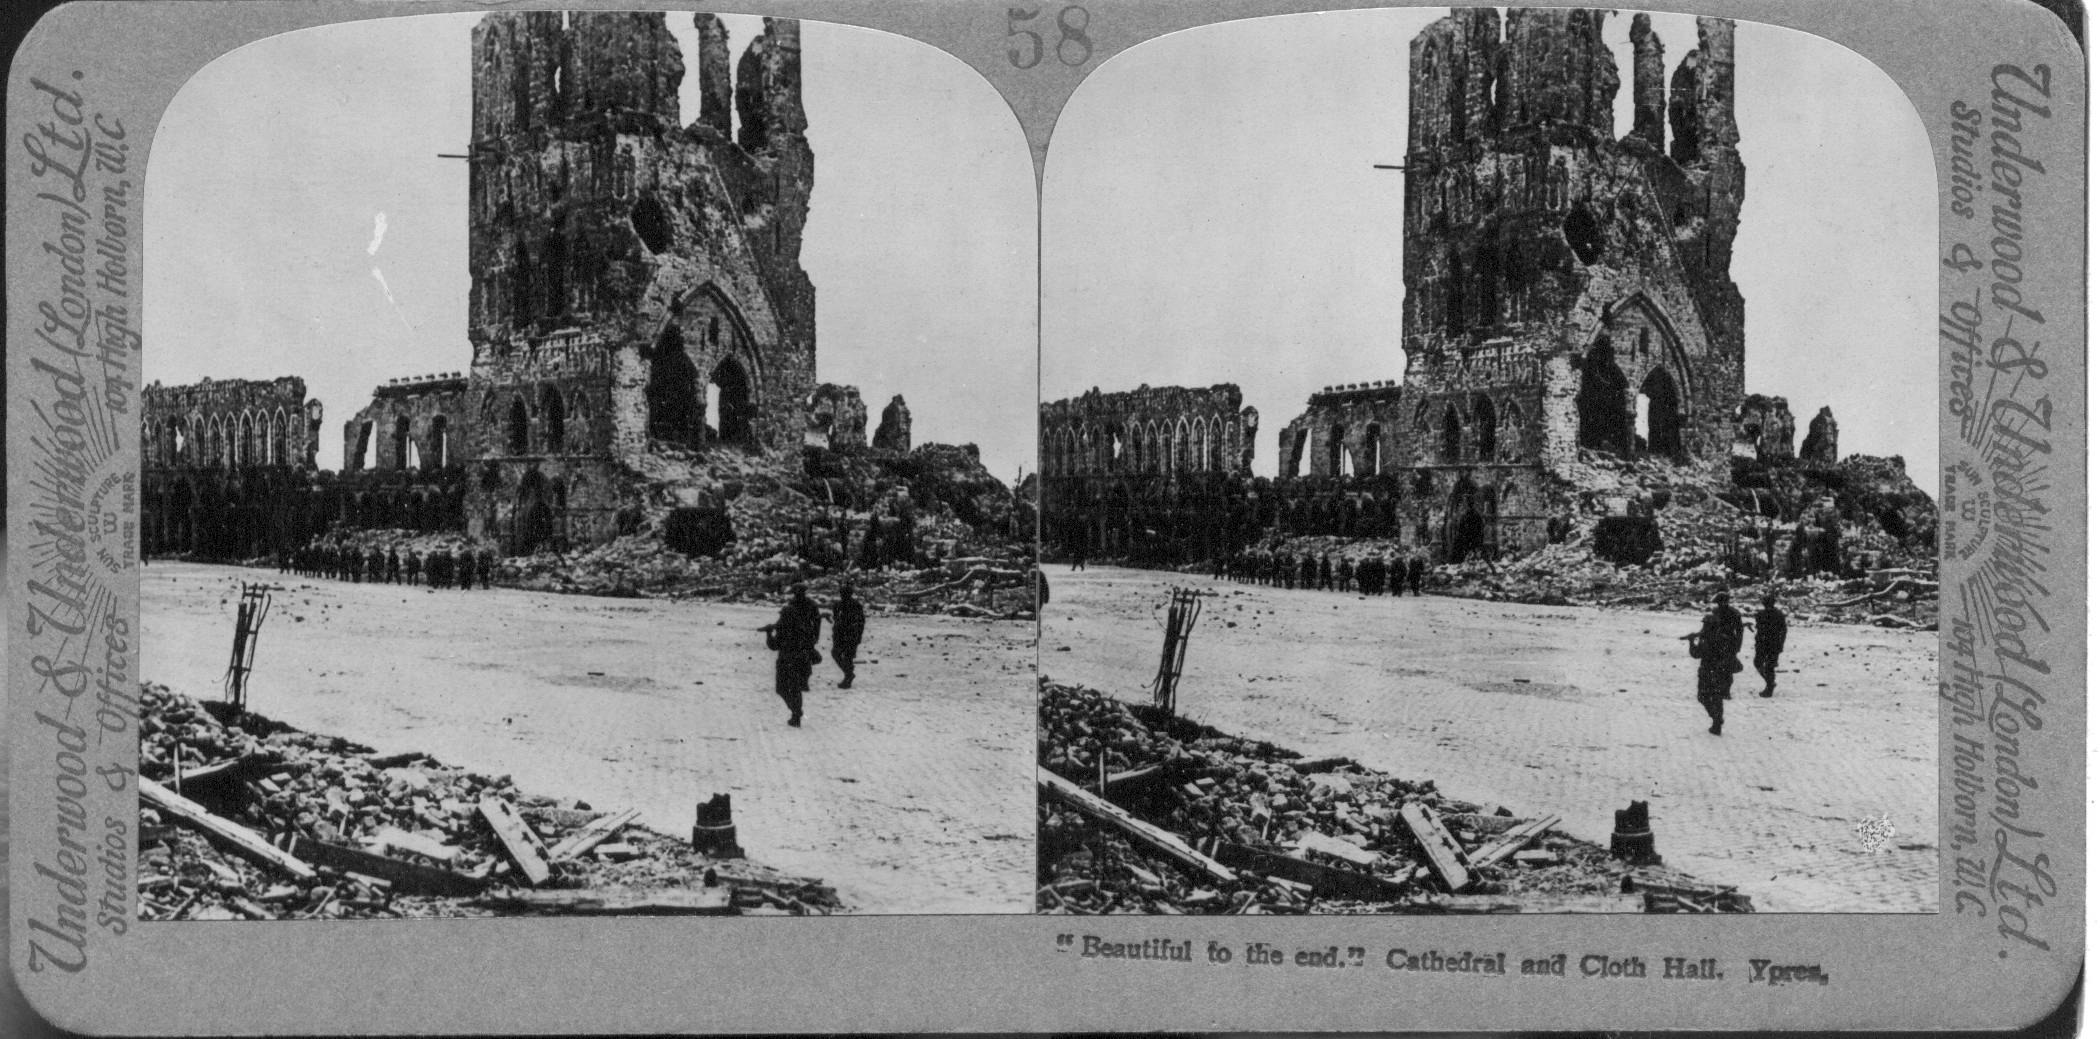 "Beautiful to the end." Cathedral and Cloth Hall. Ypres